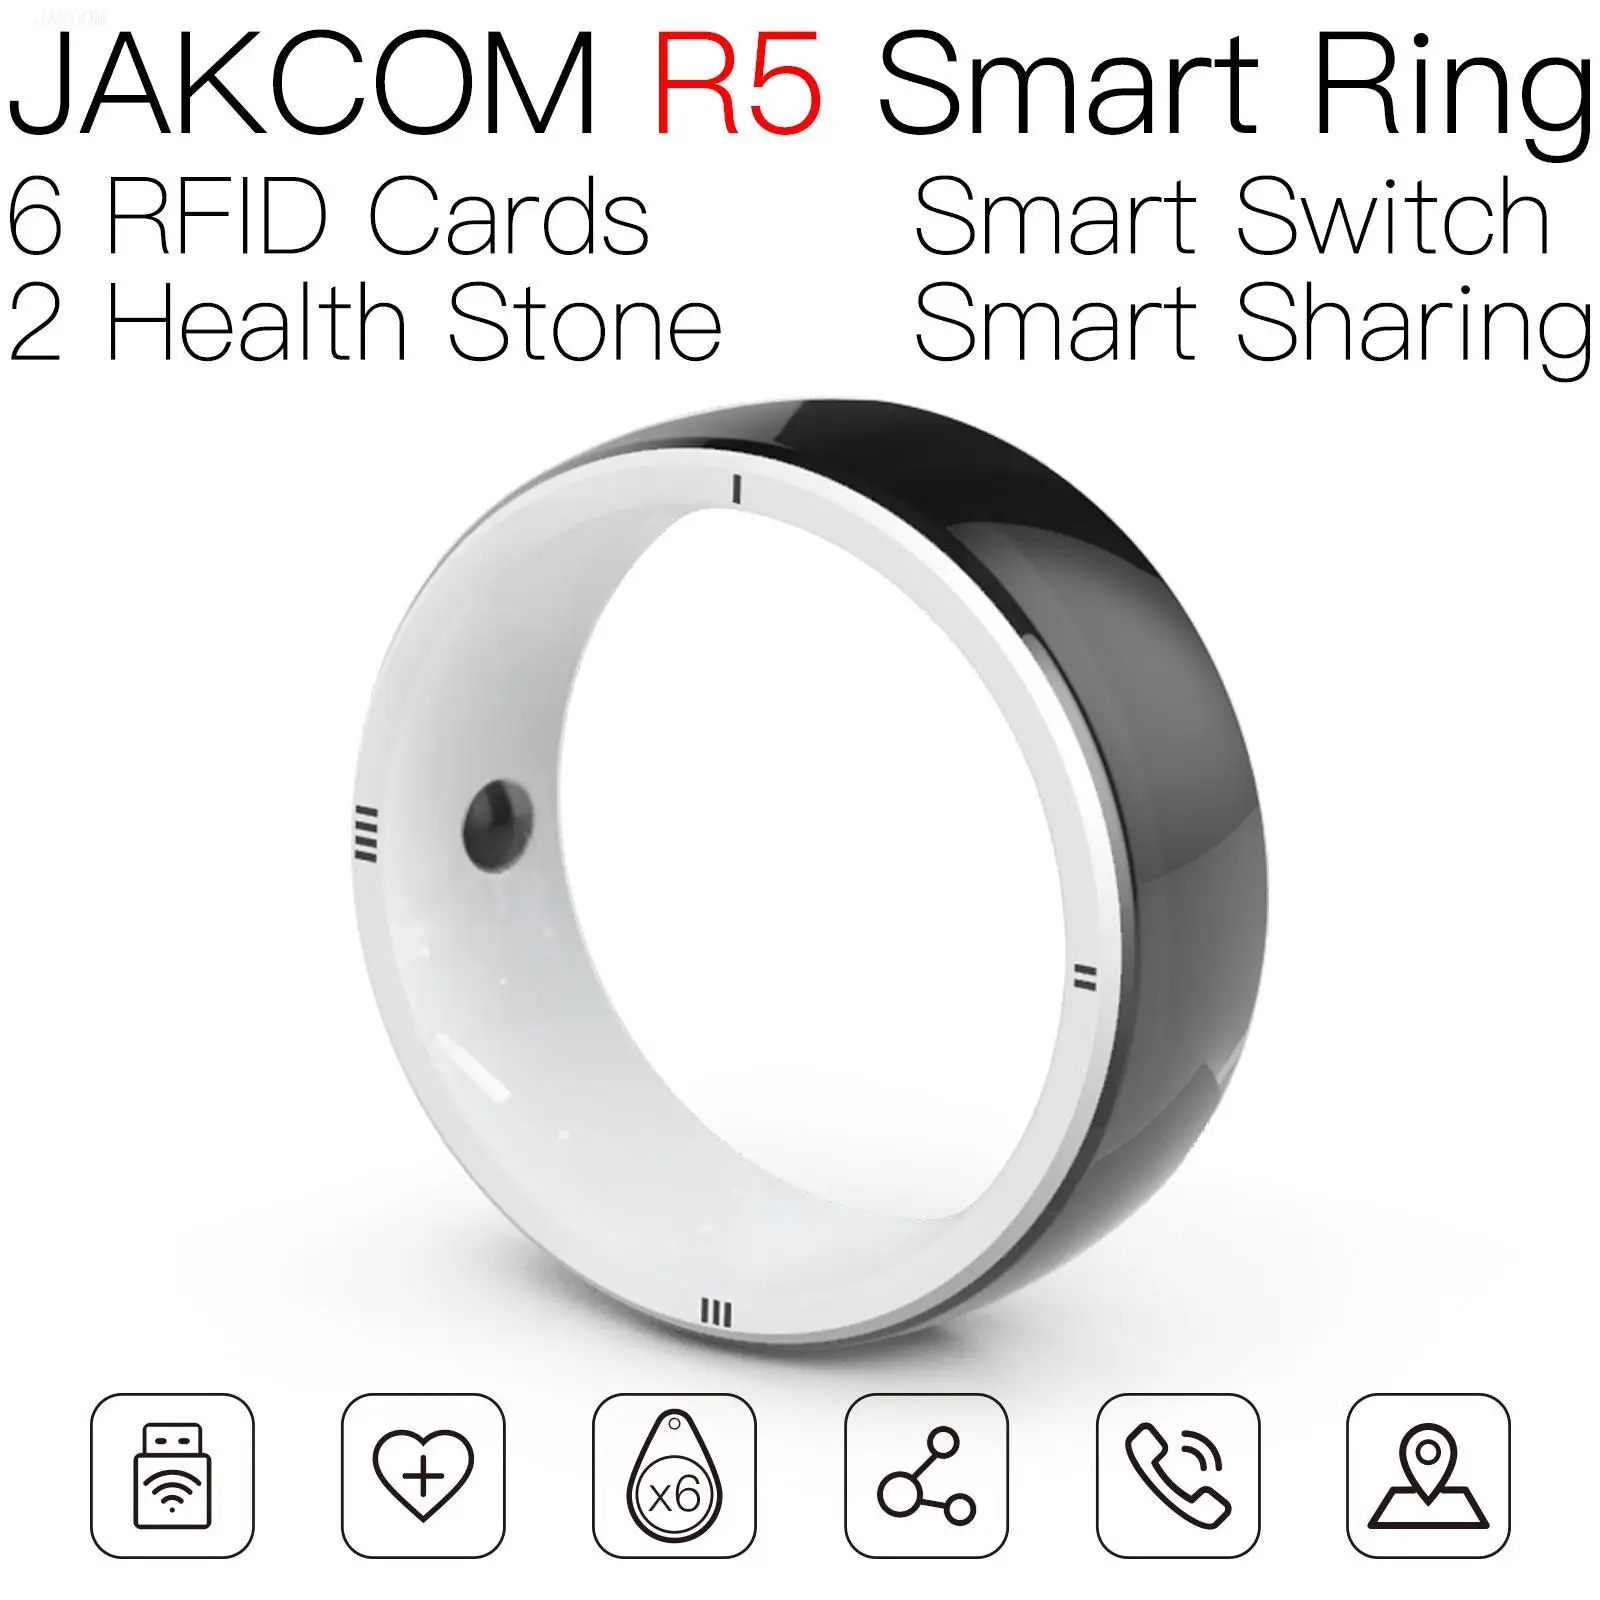 

JAKCOM R5 Smart Ring Nice than no battery nfc tag door solenoids 125khz rfid keychain t5577 implant 60 clear cards card coder